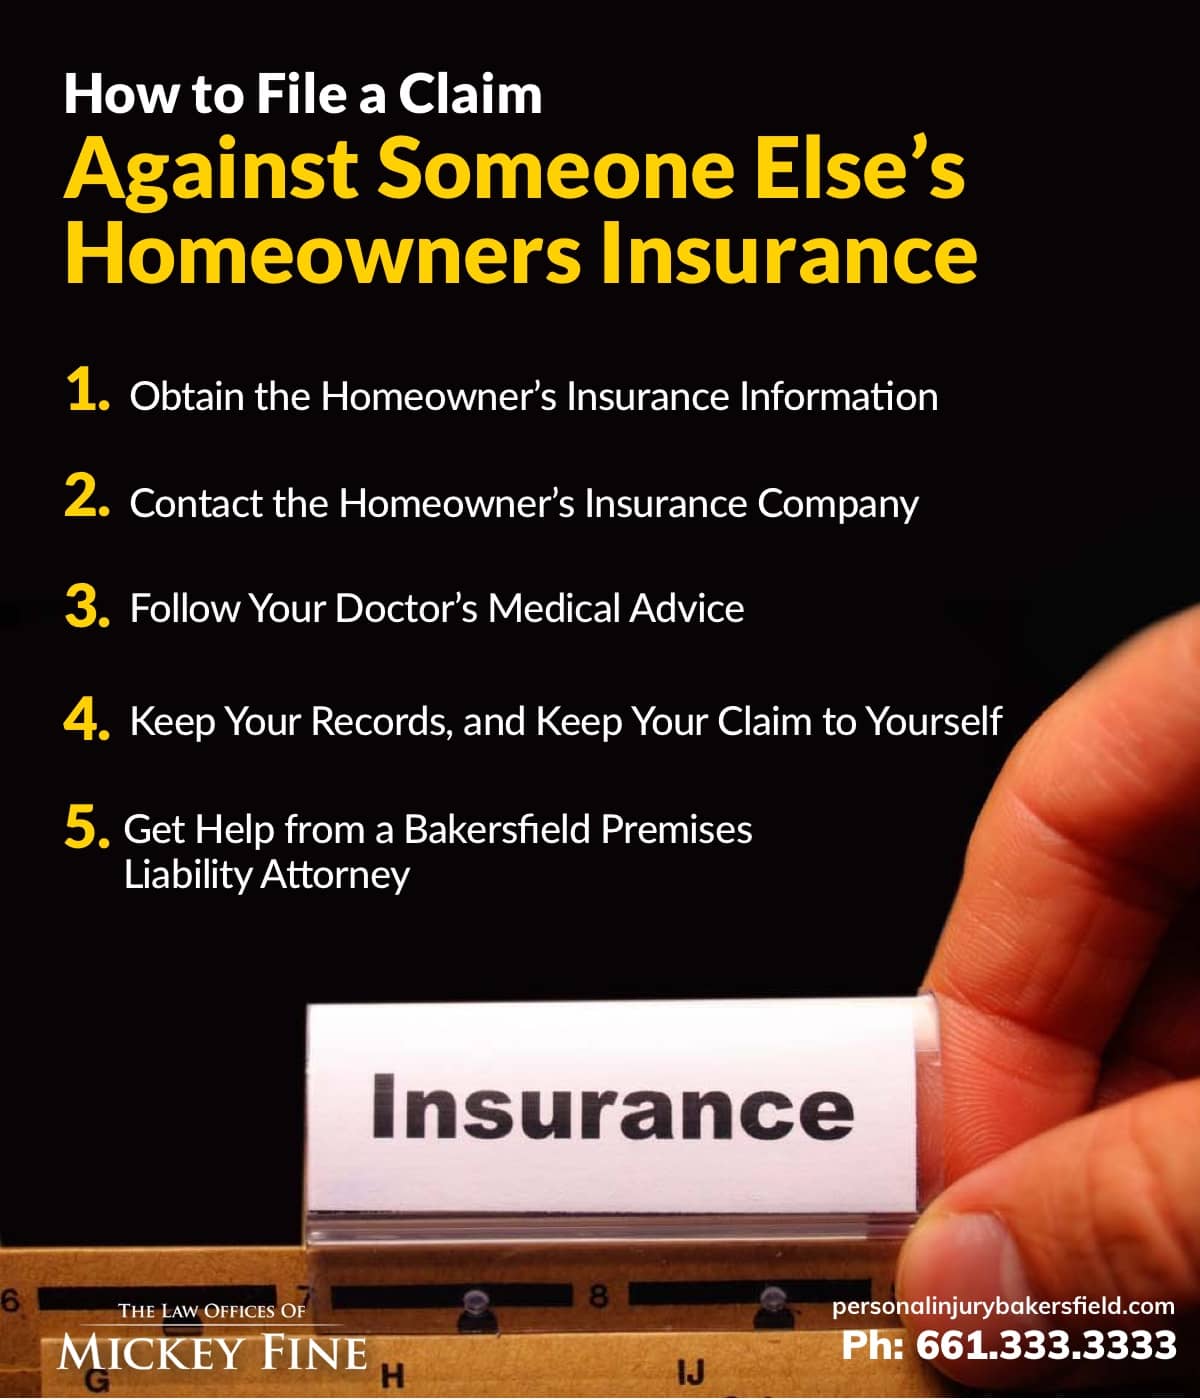 How to File a Claim Against Someone Else’s Homeowners Insurance | The Law Offices of Mickey Fine